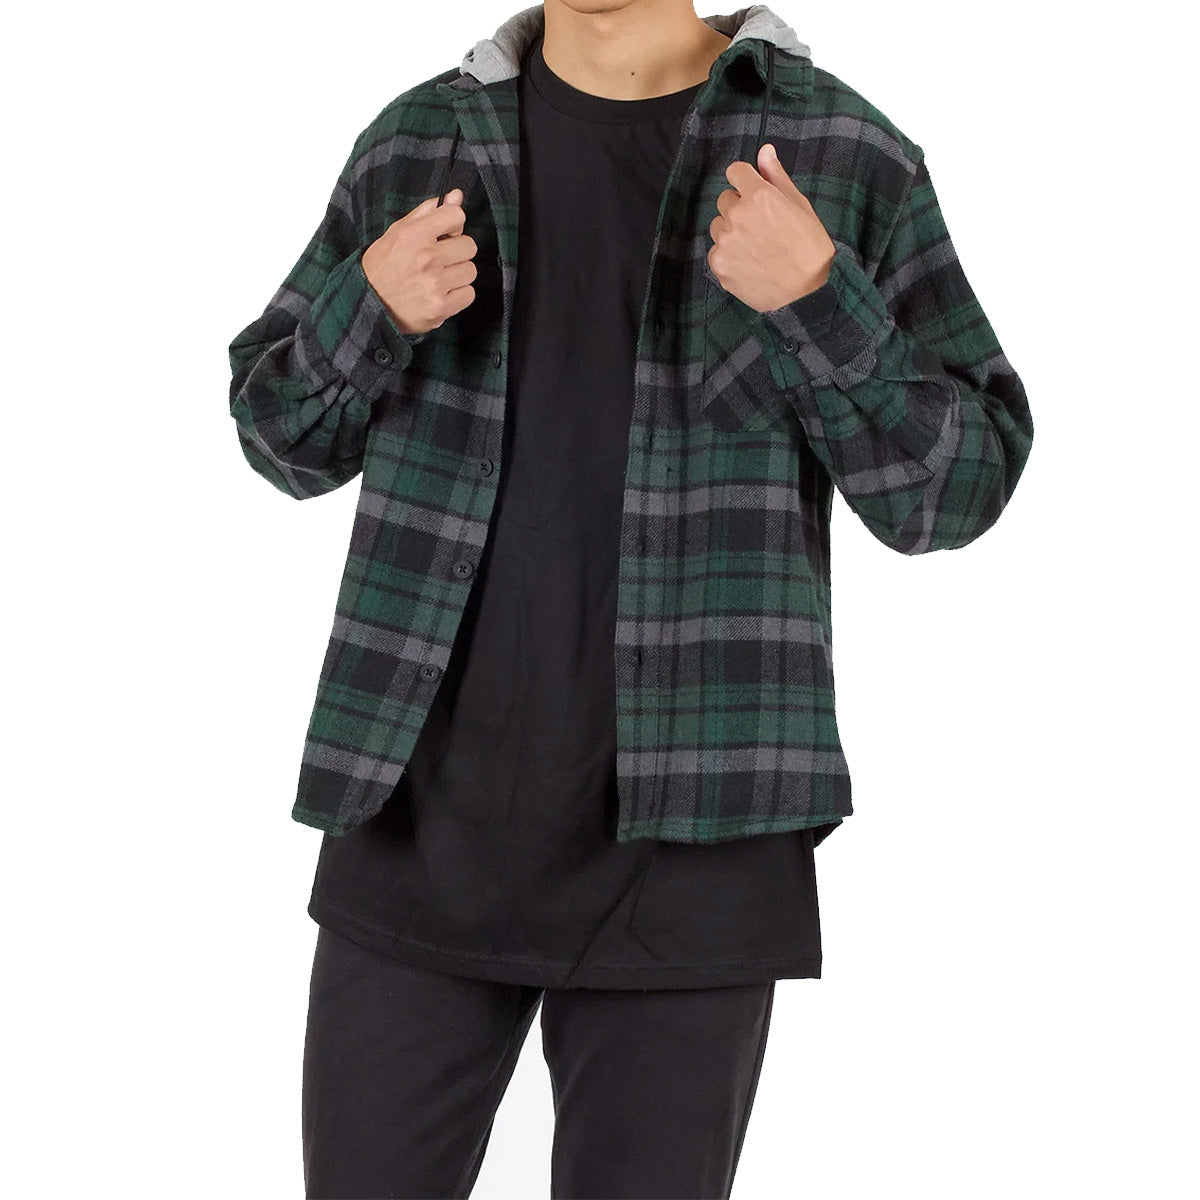 5 Pieces Pack of Green/Black - Drippy Smiley Flannel Shirt Hoodie 1S-1M-2L-1XL